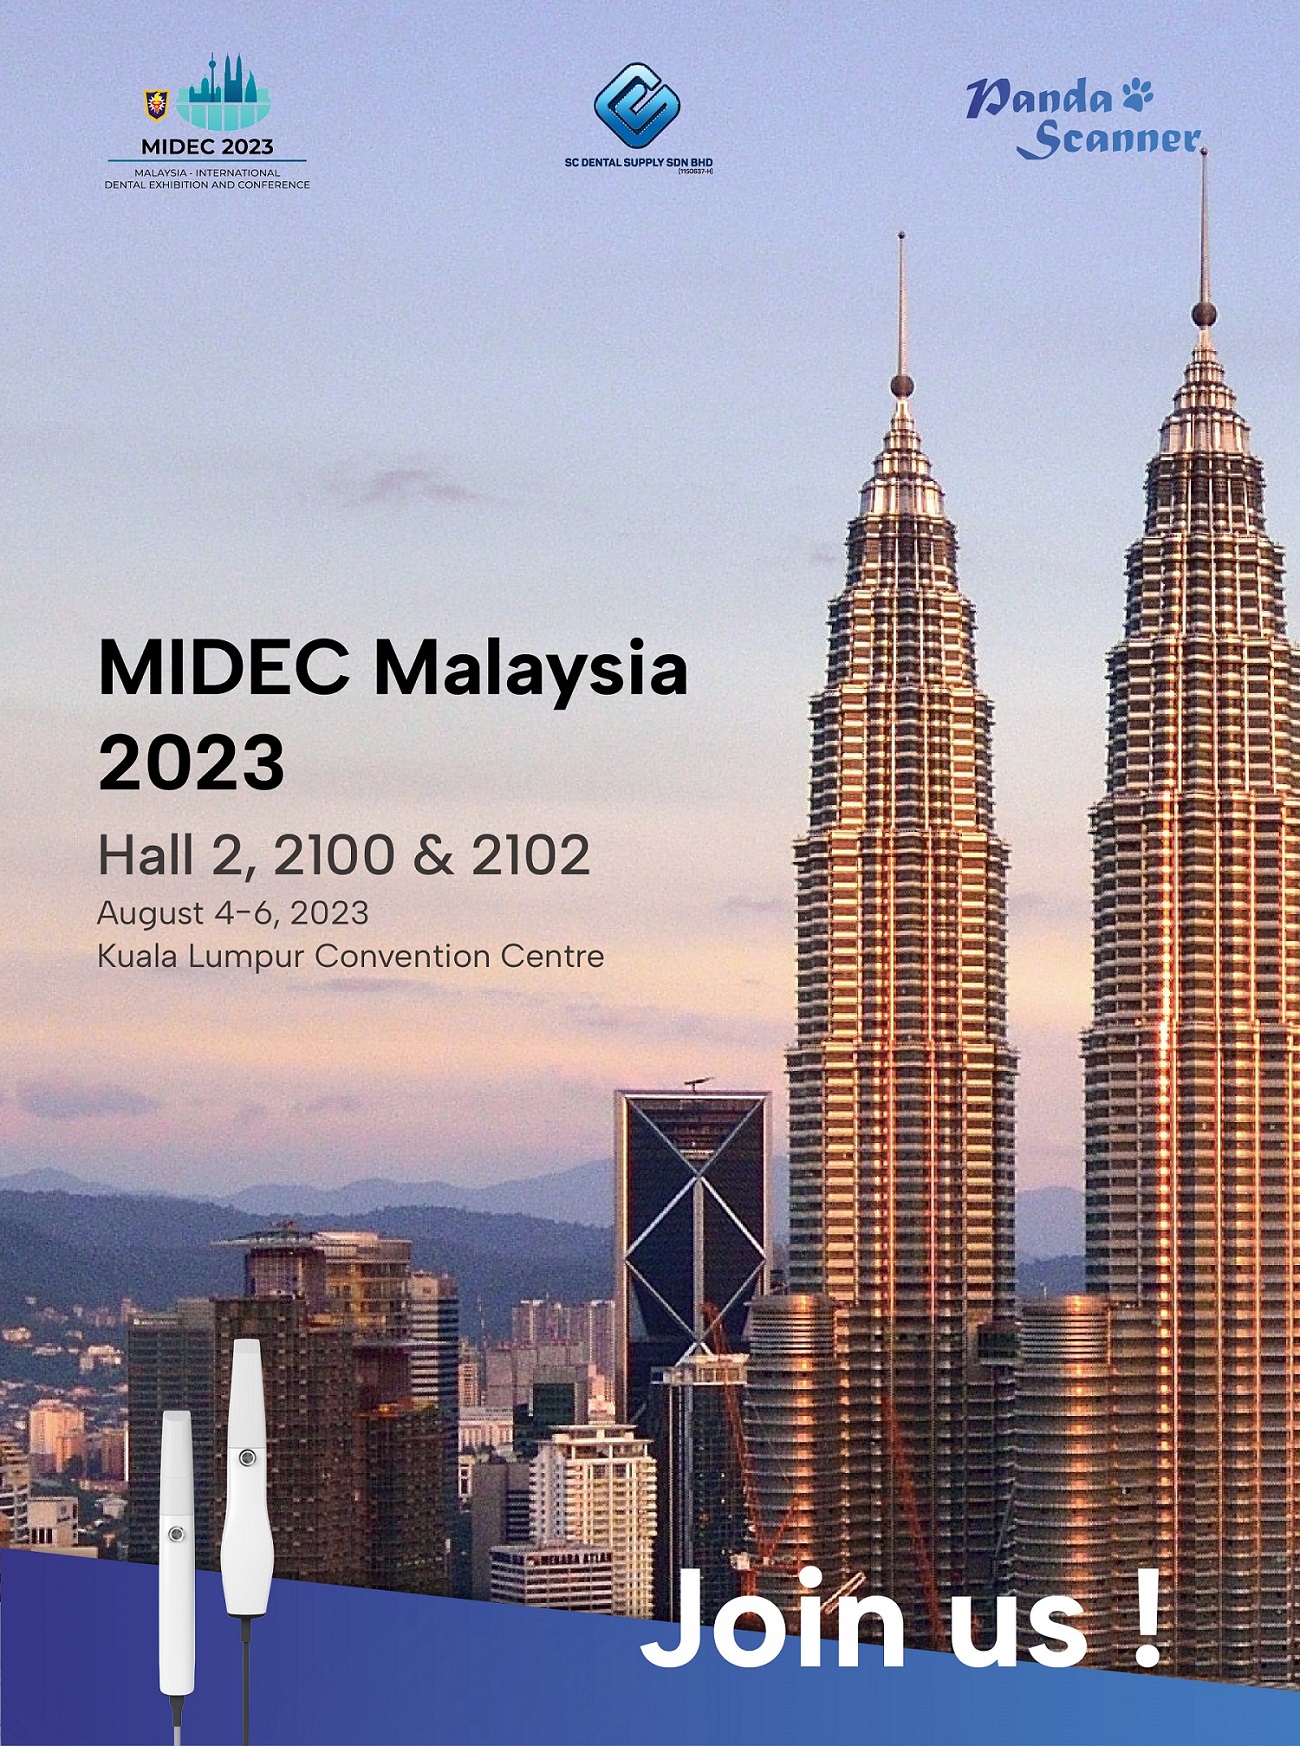 Panda Scanner Invites you to Participate in the MIDEC Malaysia 2023